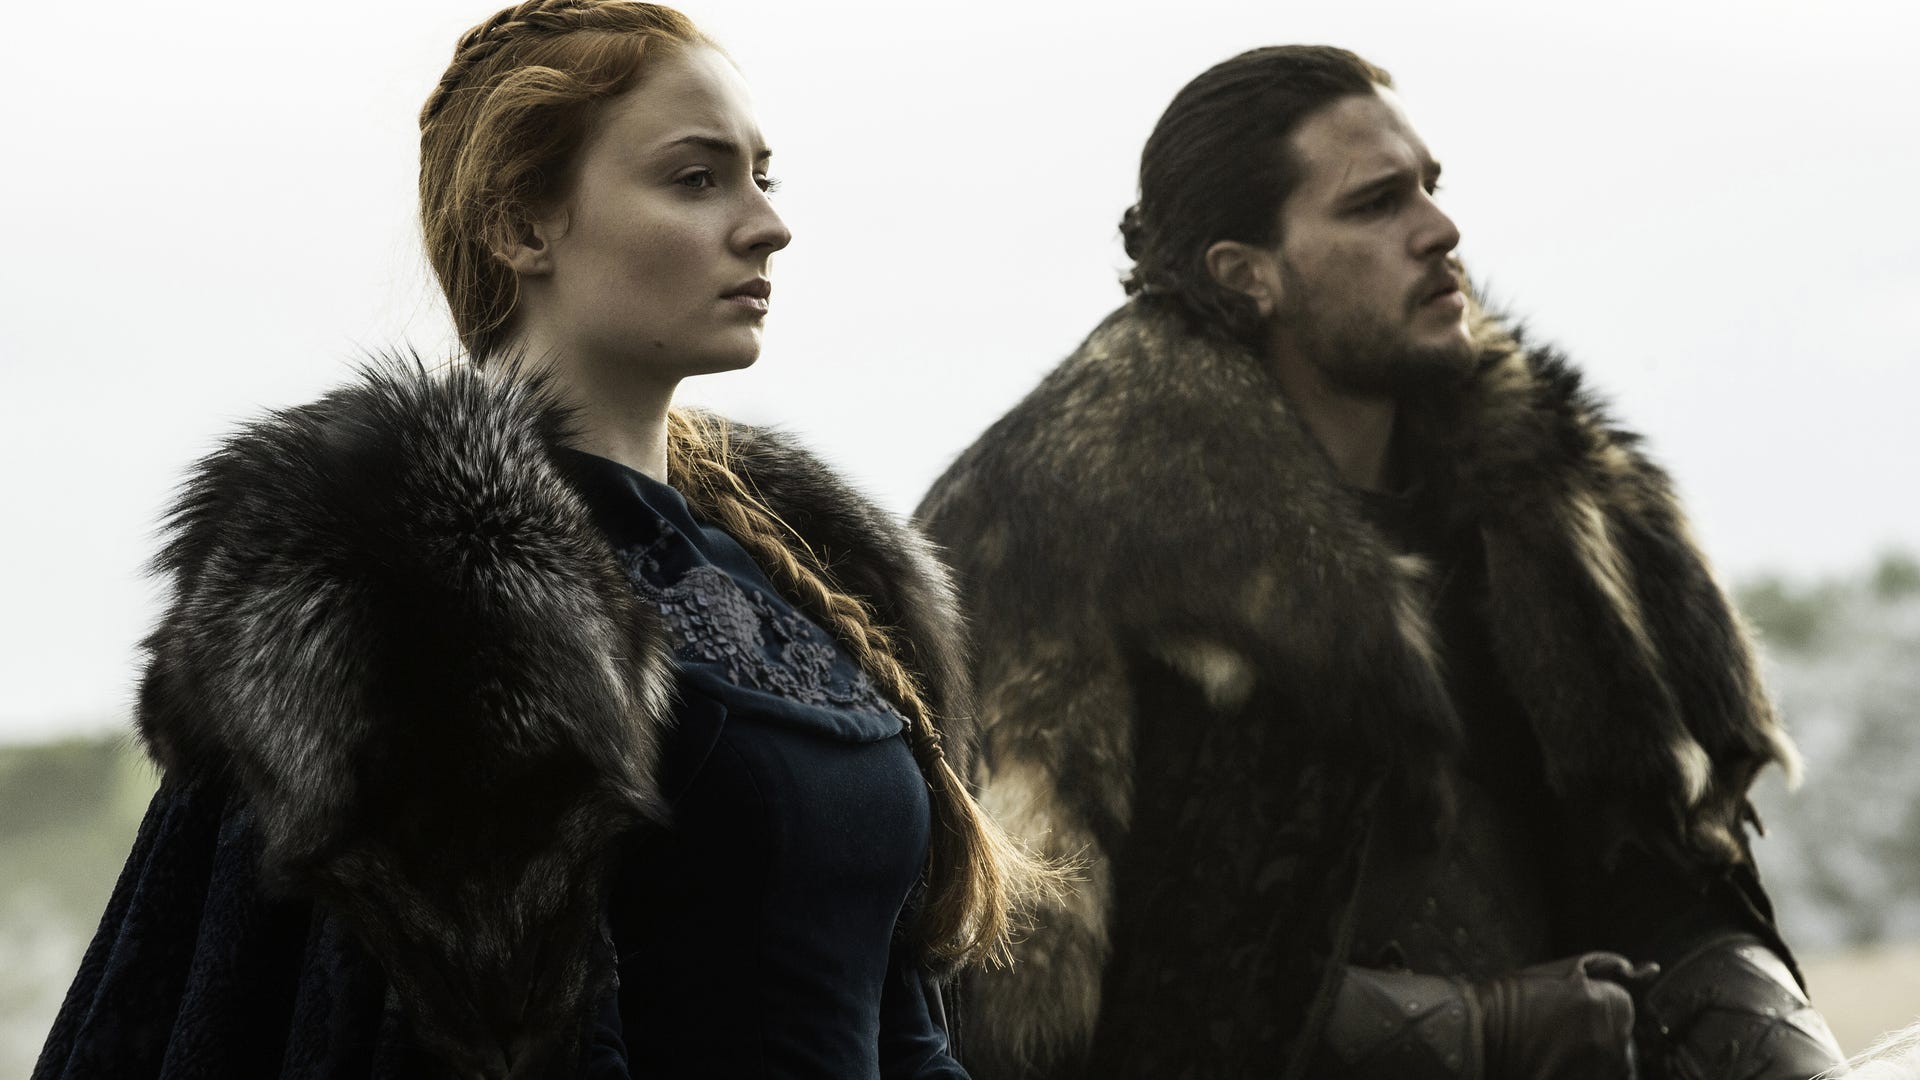 Sophie Turner and Kit Harington, Game of Thrones